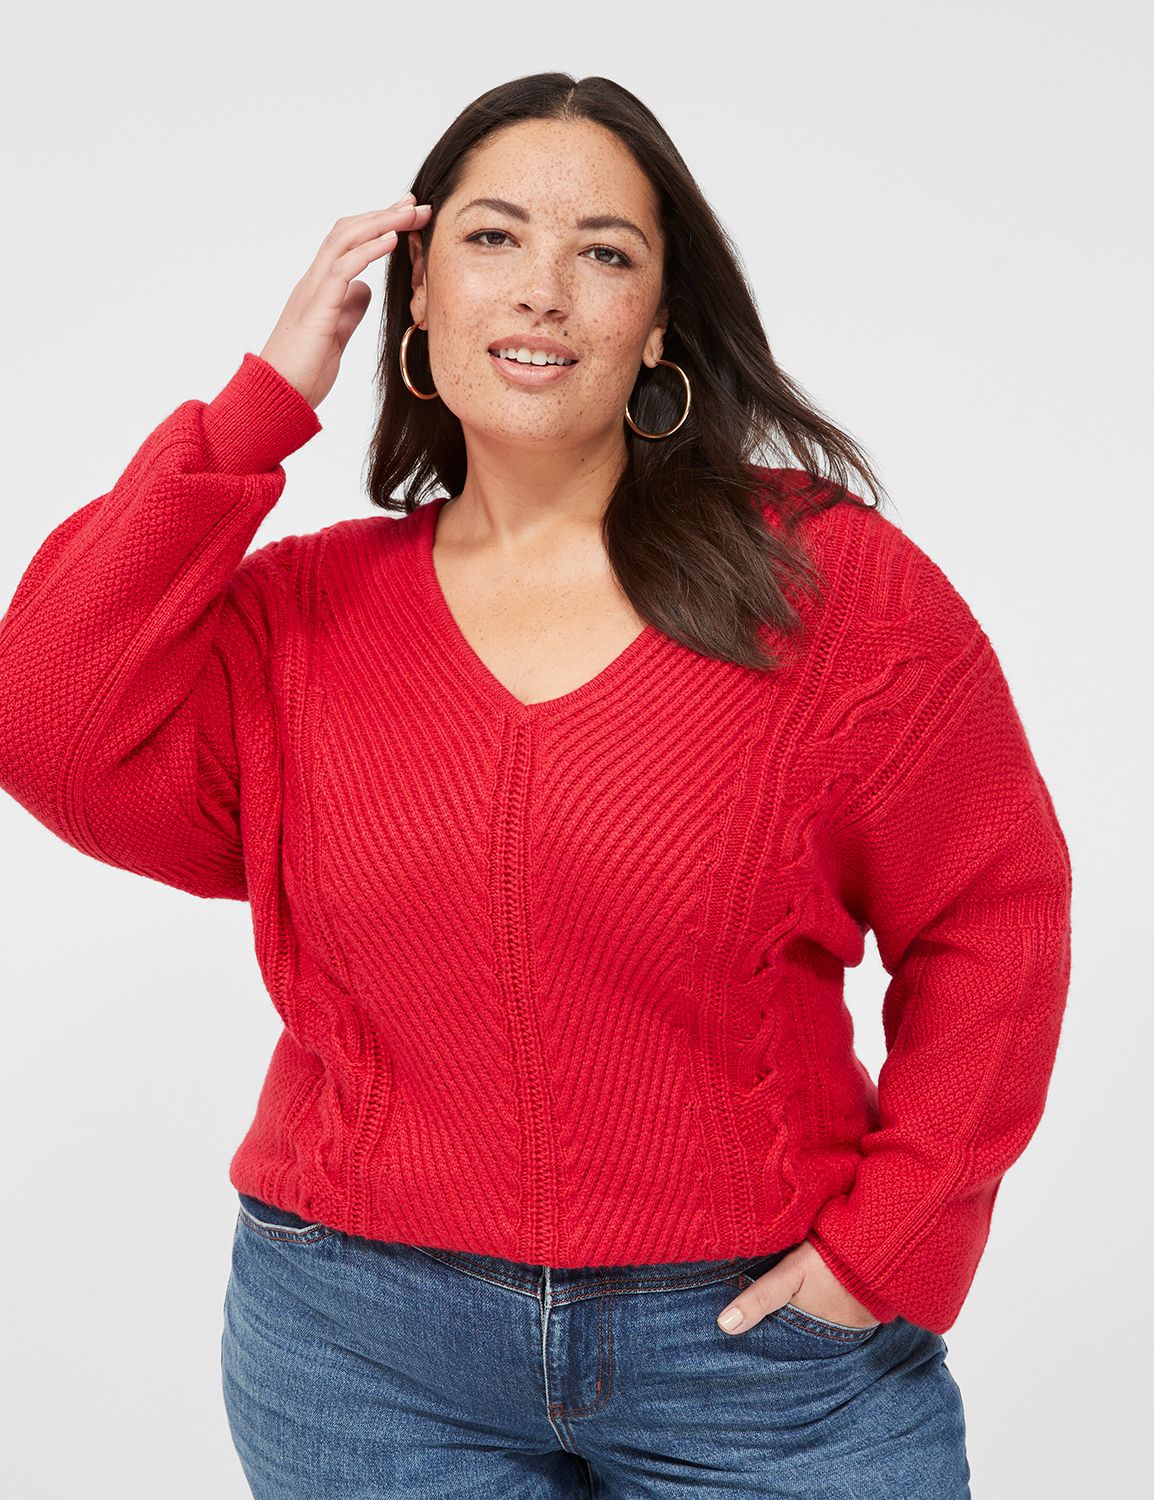  Youngnet,Plus Size Clearance Clothing for Women,Sales